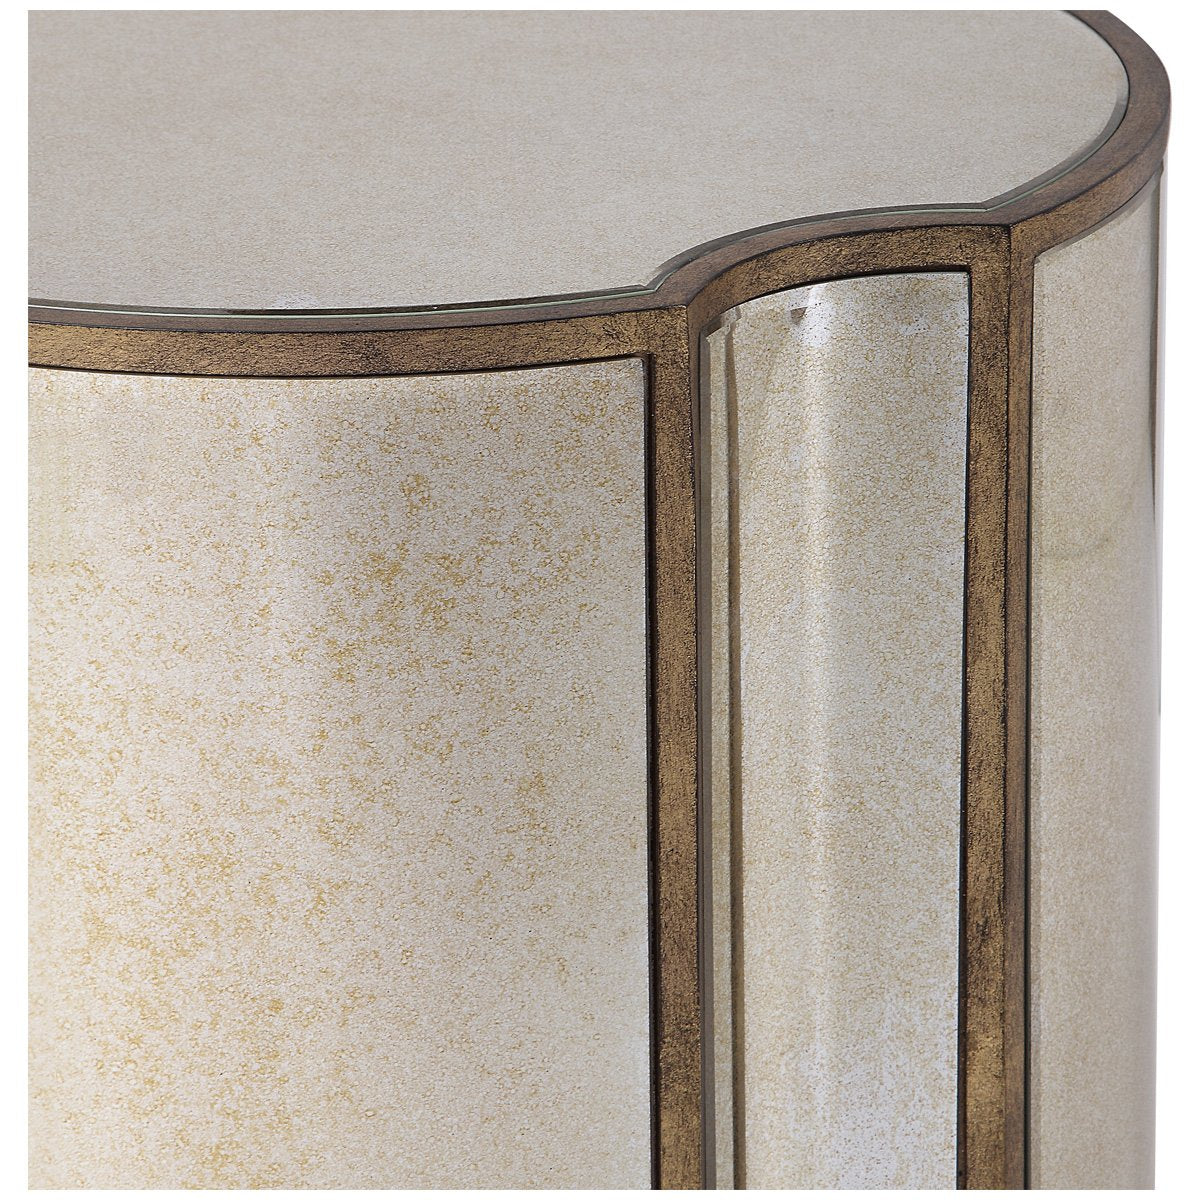 Uttermost Harlow Mirrored Accent Table